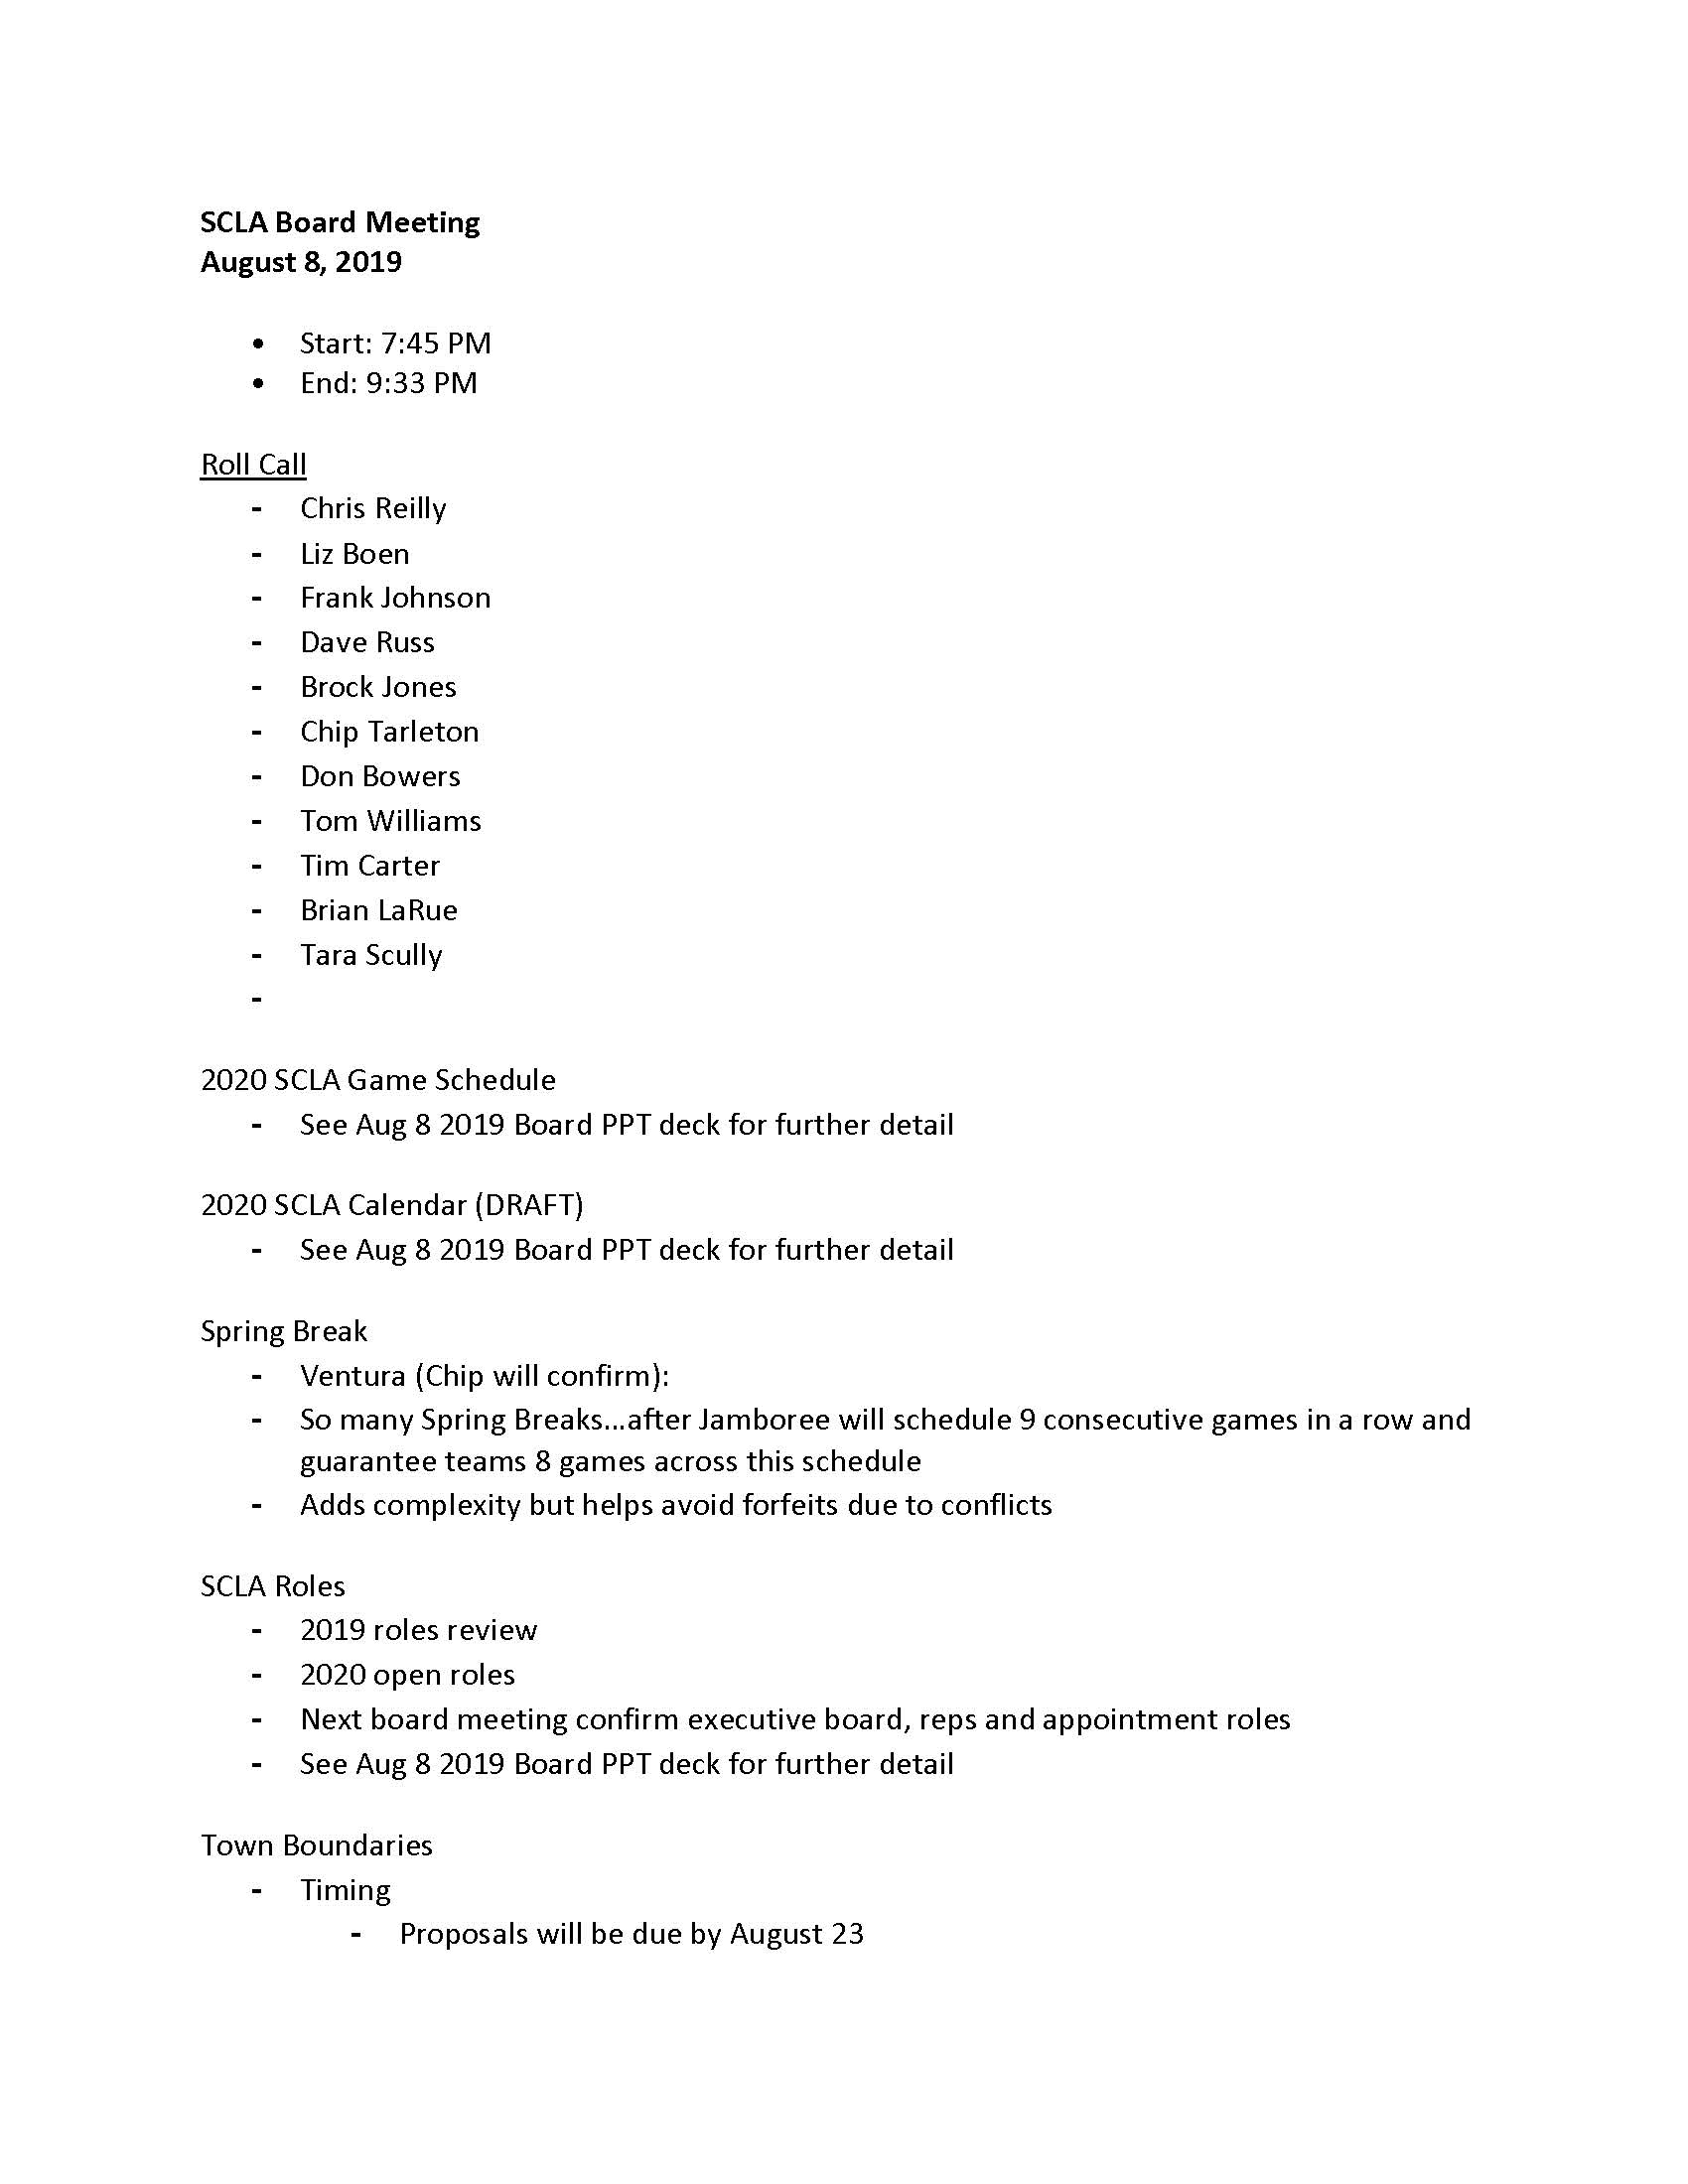 SCLA Board Meeting Minutes August 8 2019_Page_1